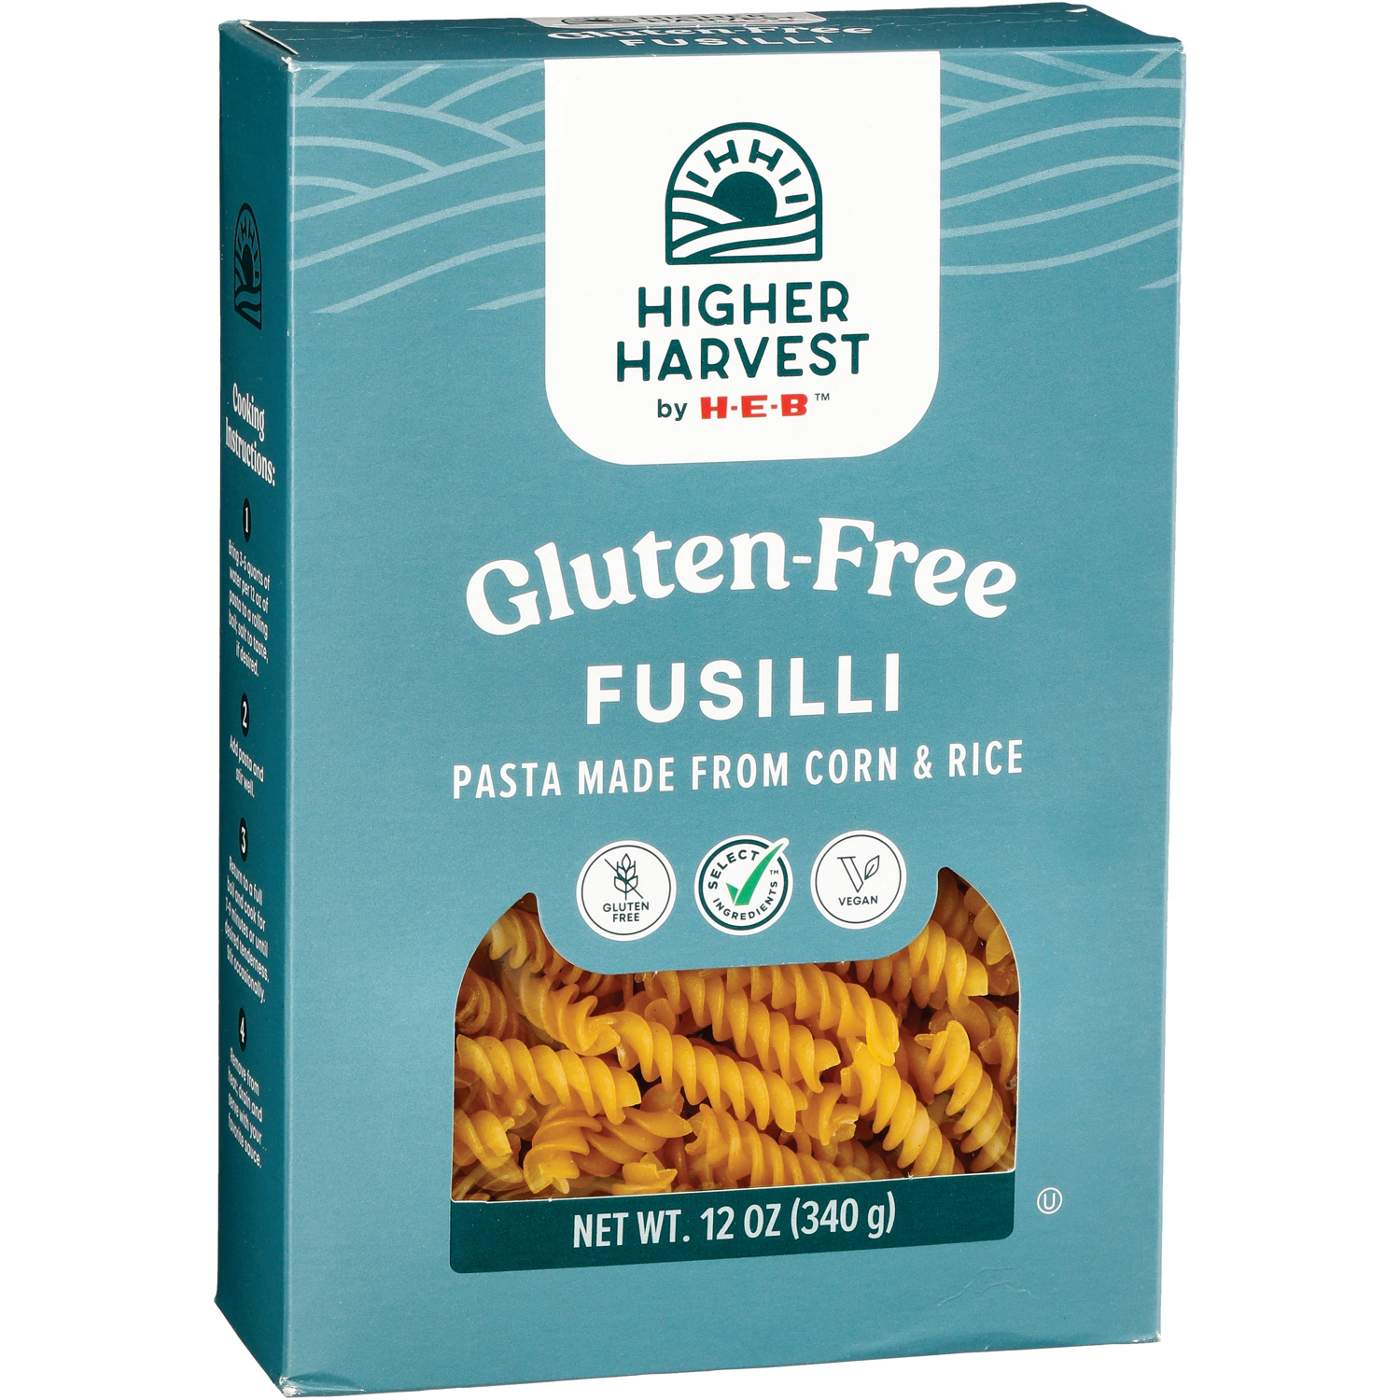 Higher Harvest by H-E-B Gluten-Free Fusilli Pasta Noodles; image 3 of 3